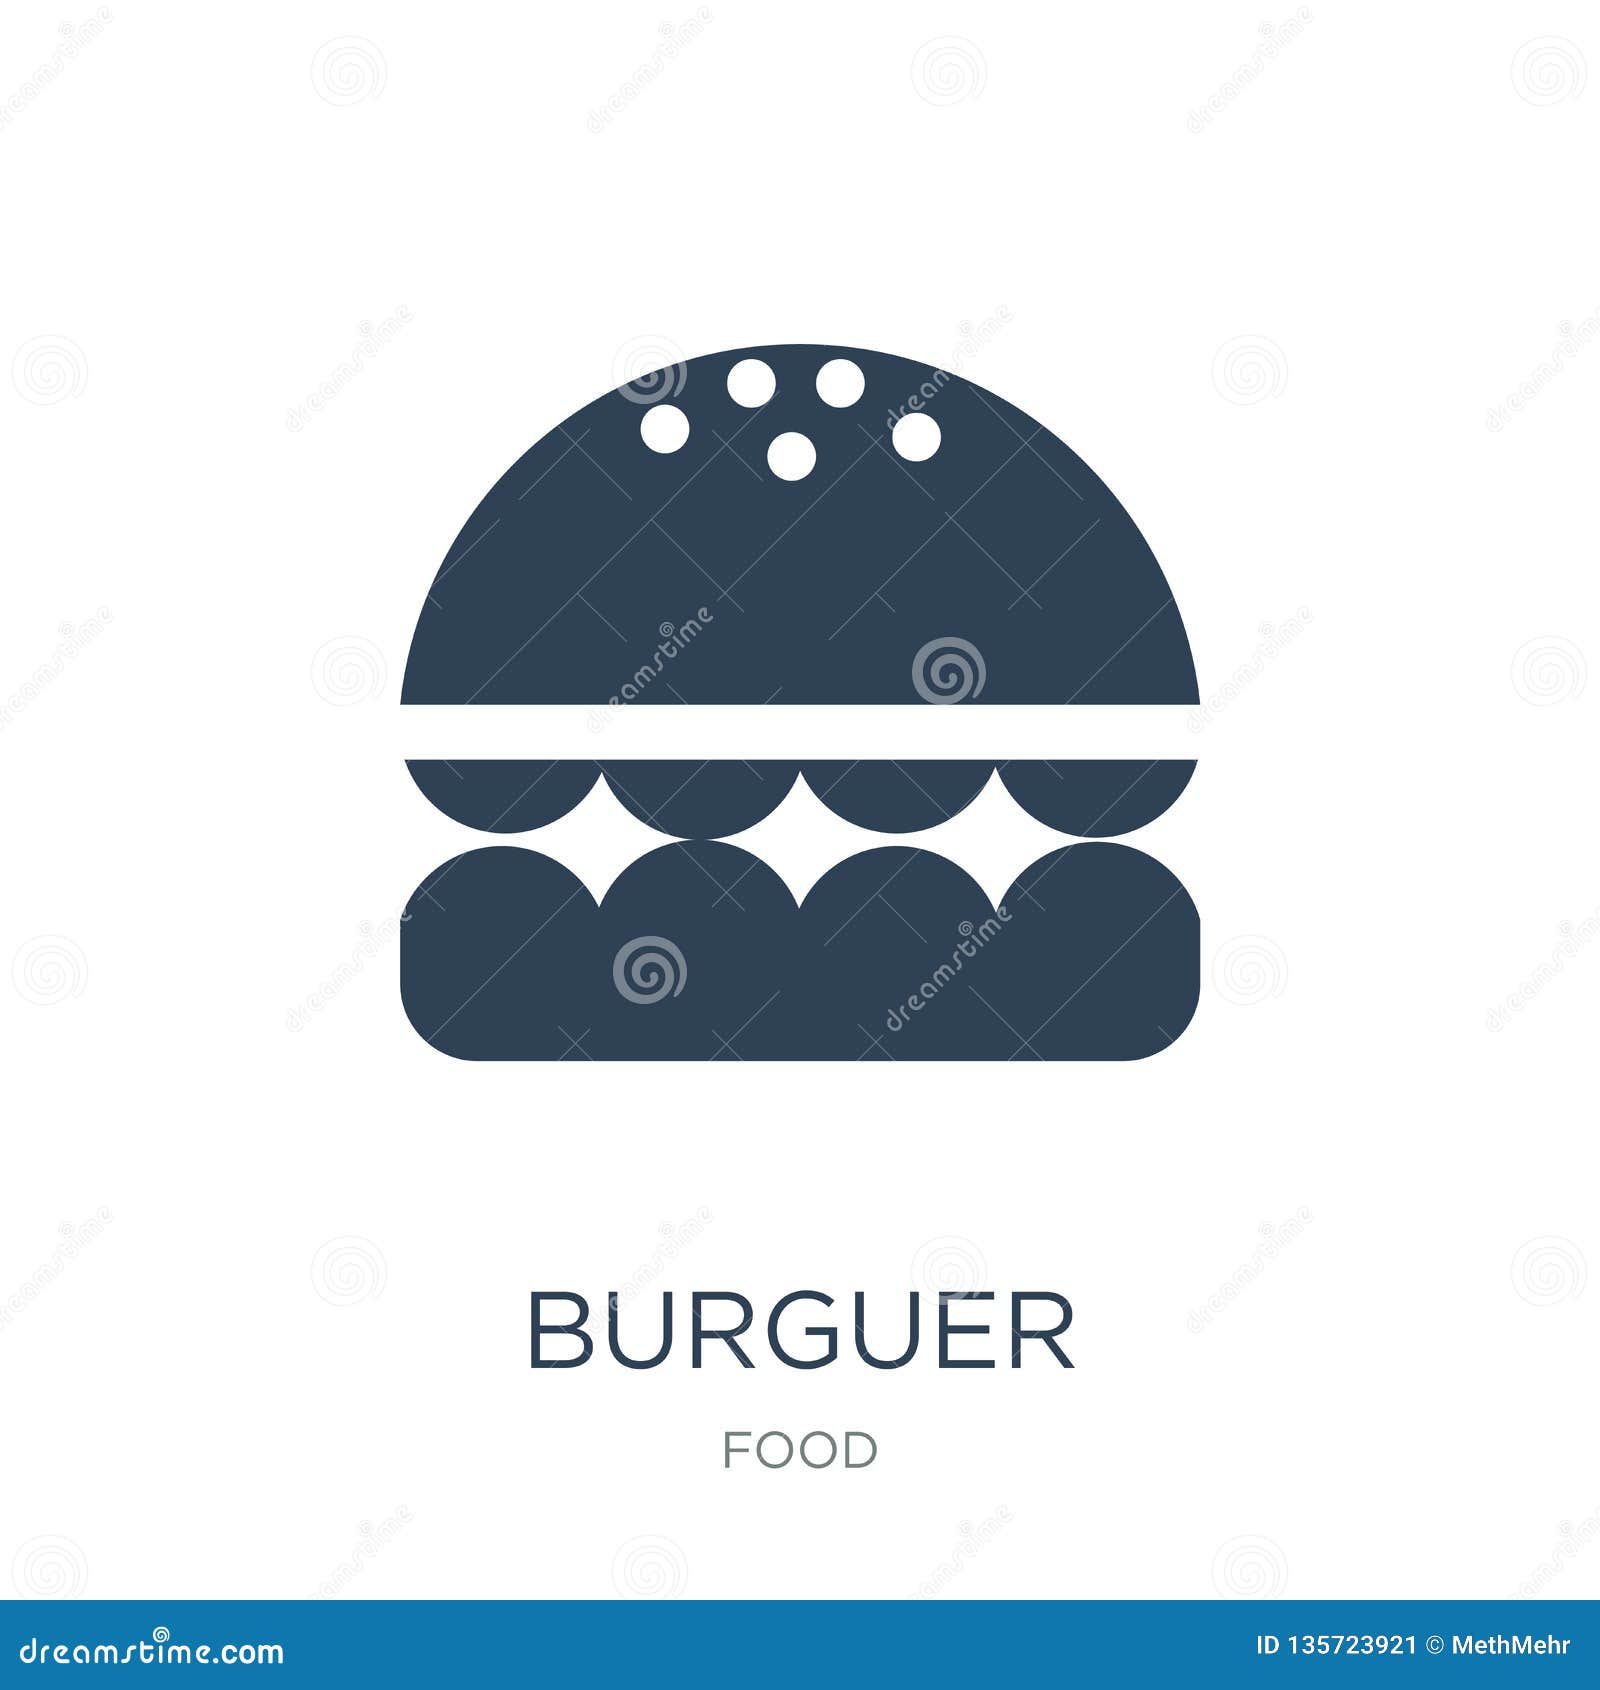 Burguer Icon In Trendy Design Style. Burguer Icon Isolated On White